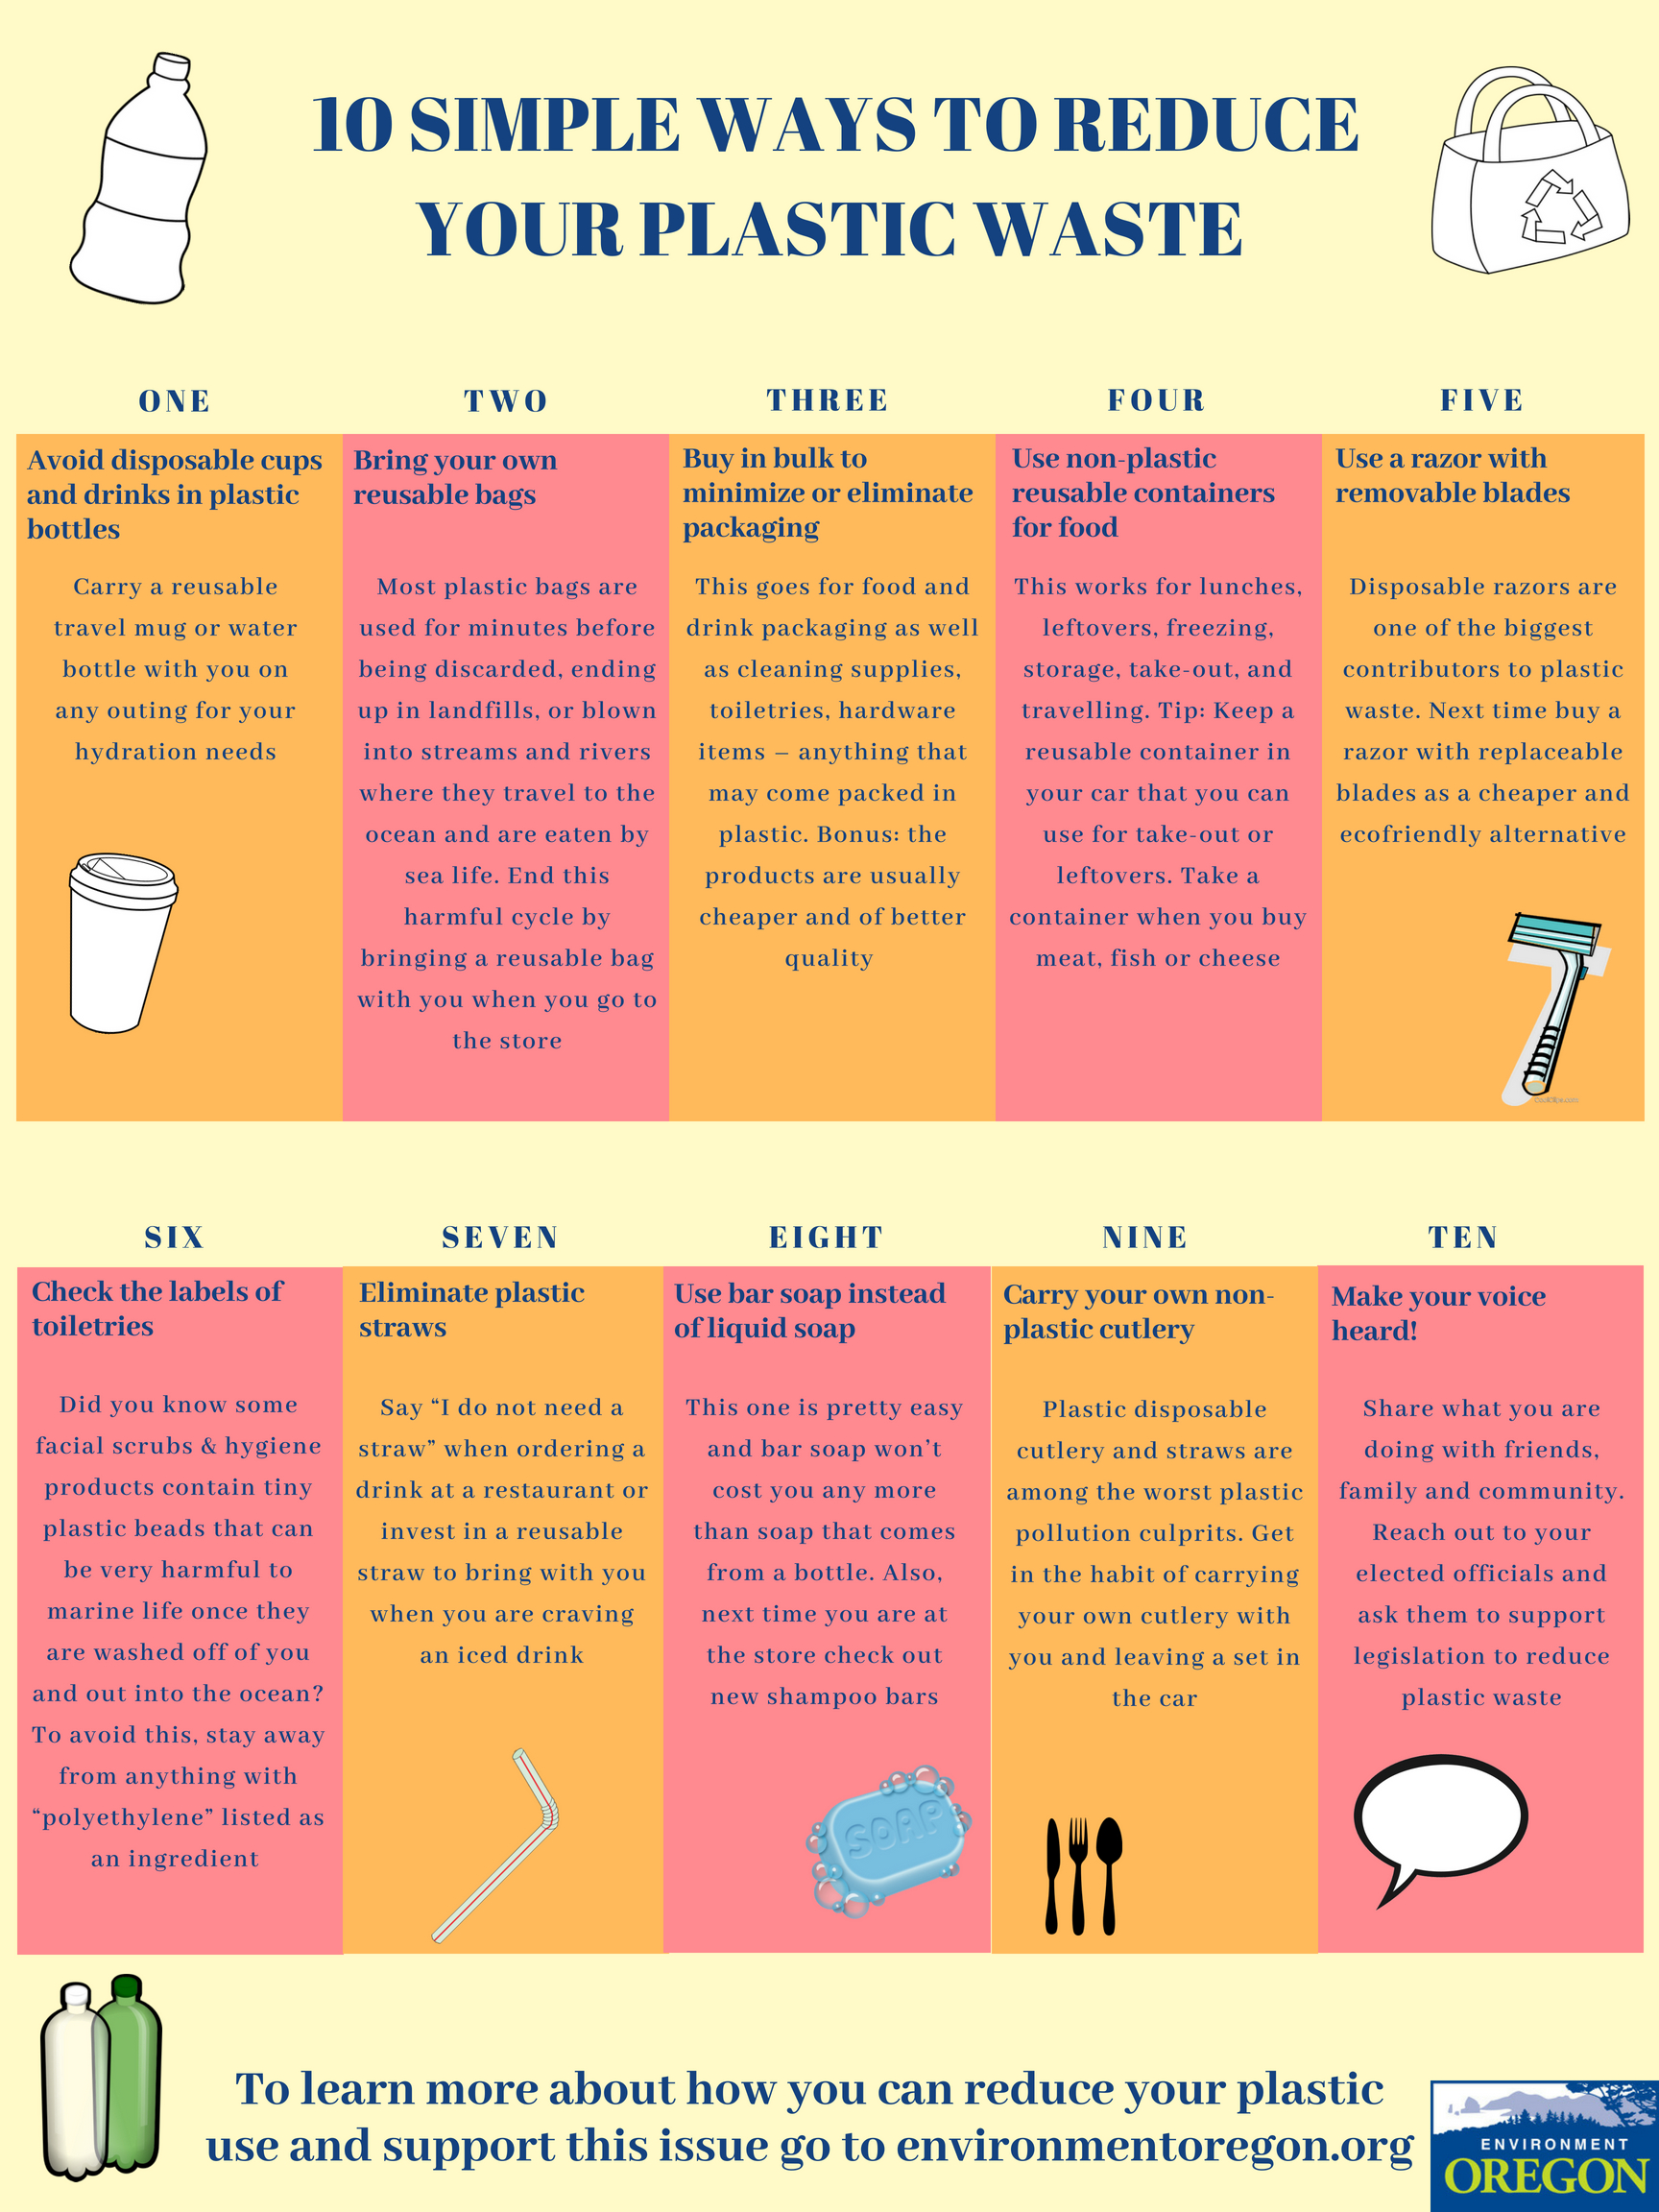 Top tips to reduce your plastic waste - National Geographic Kids